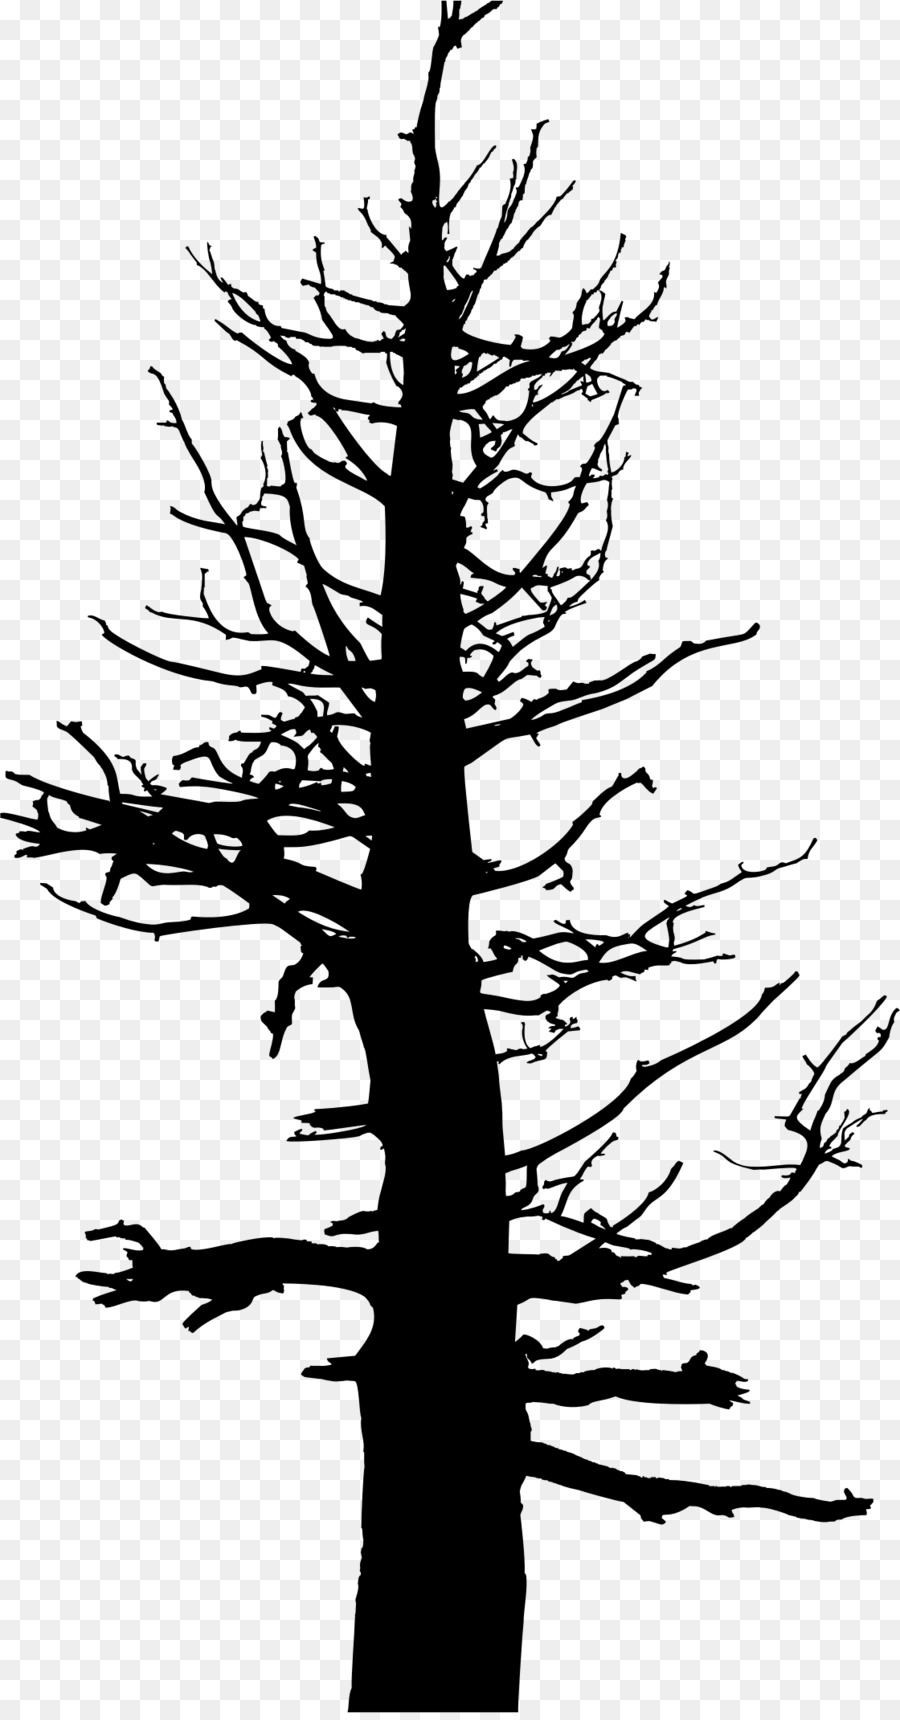 Tree Drawing Silhouette Snag Clip art - tree trunk png download - 1120*2132 - Free Transparent Tree png Download.